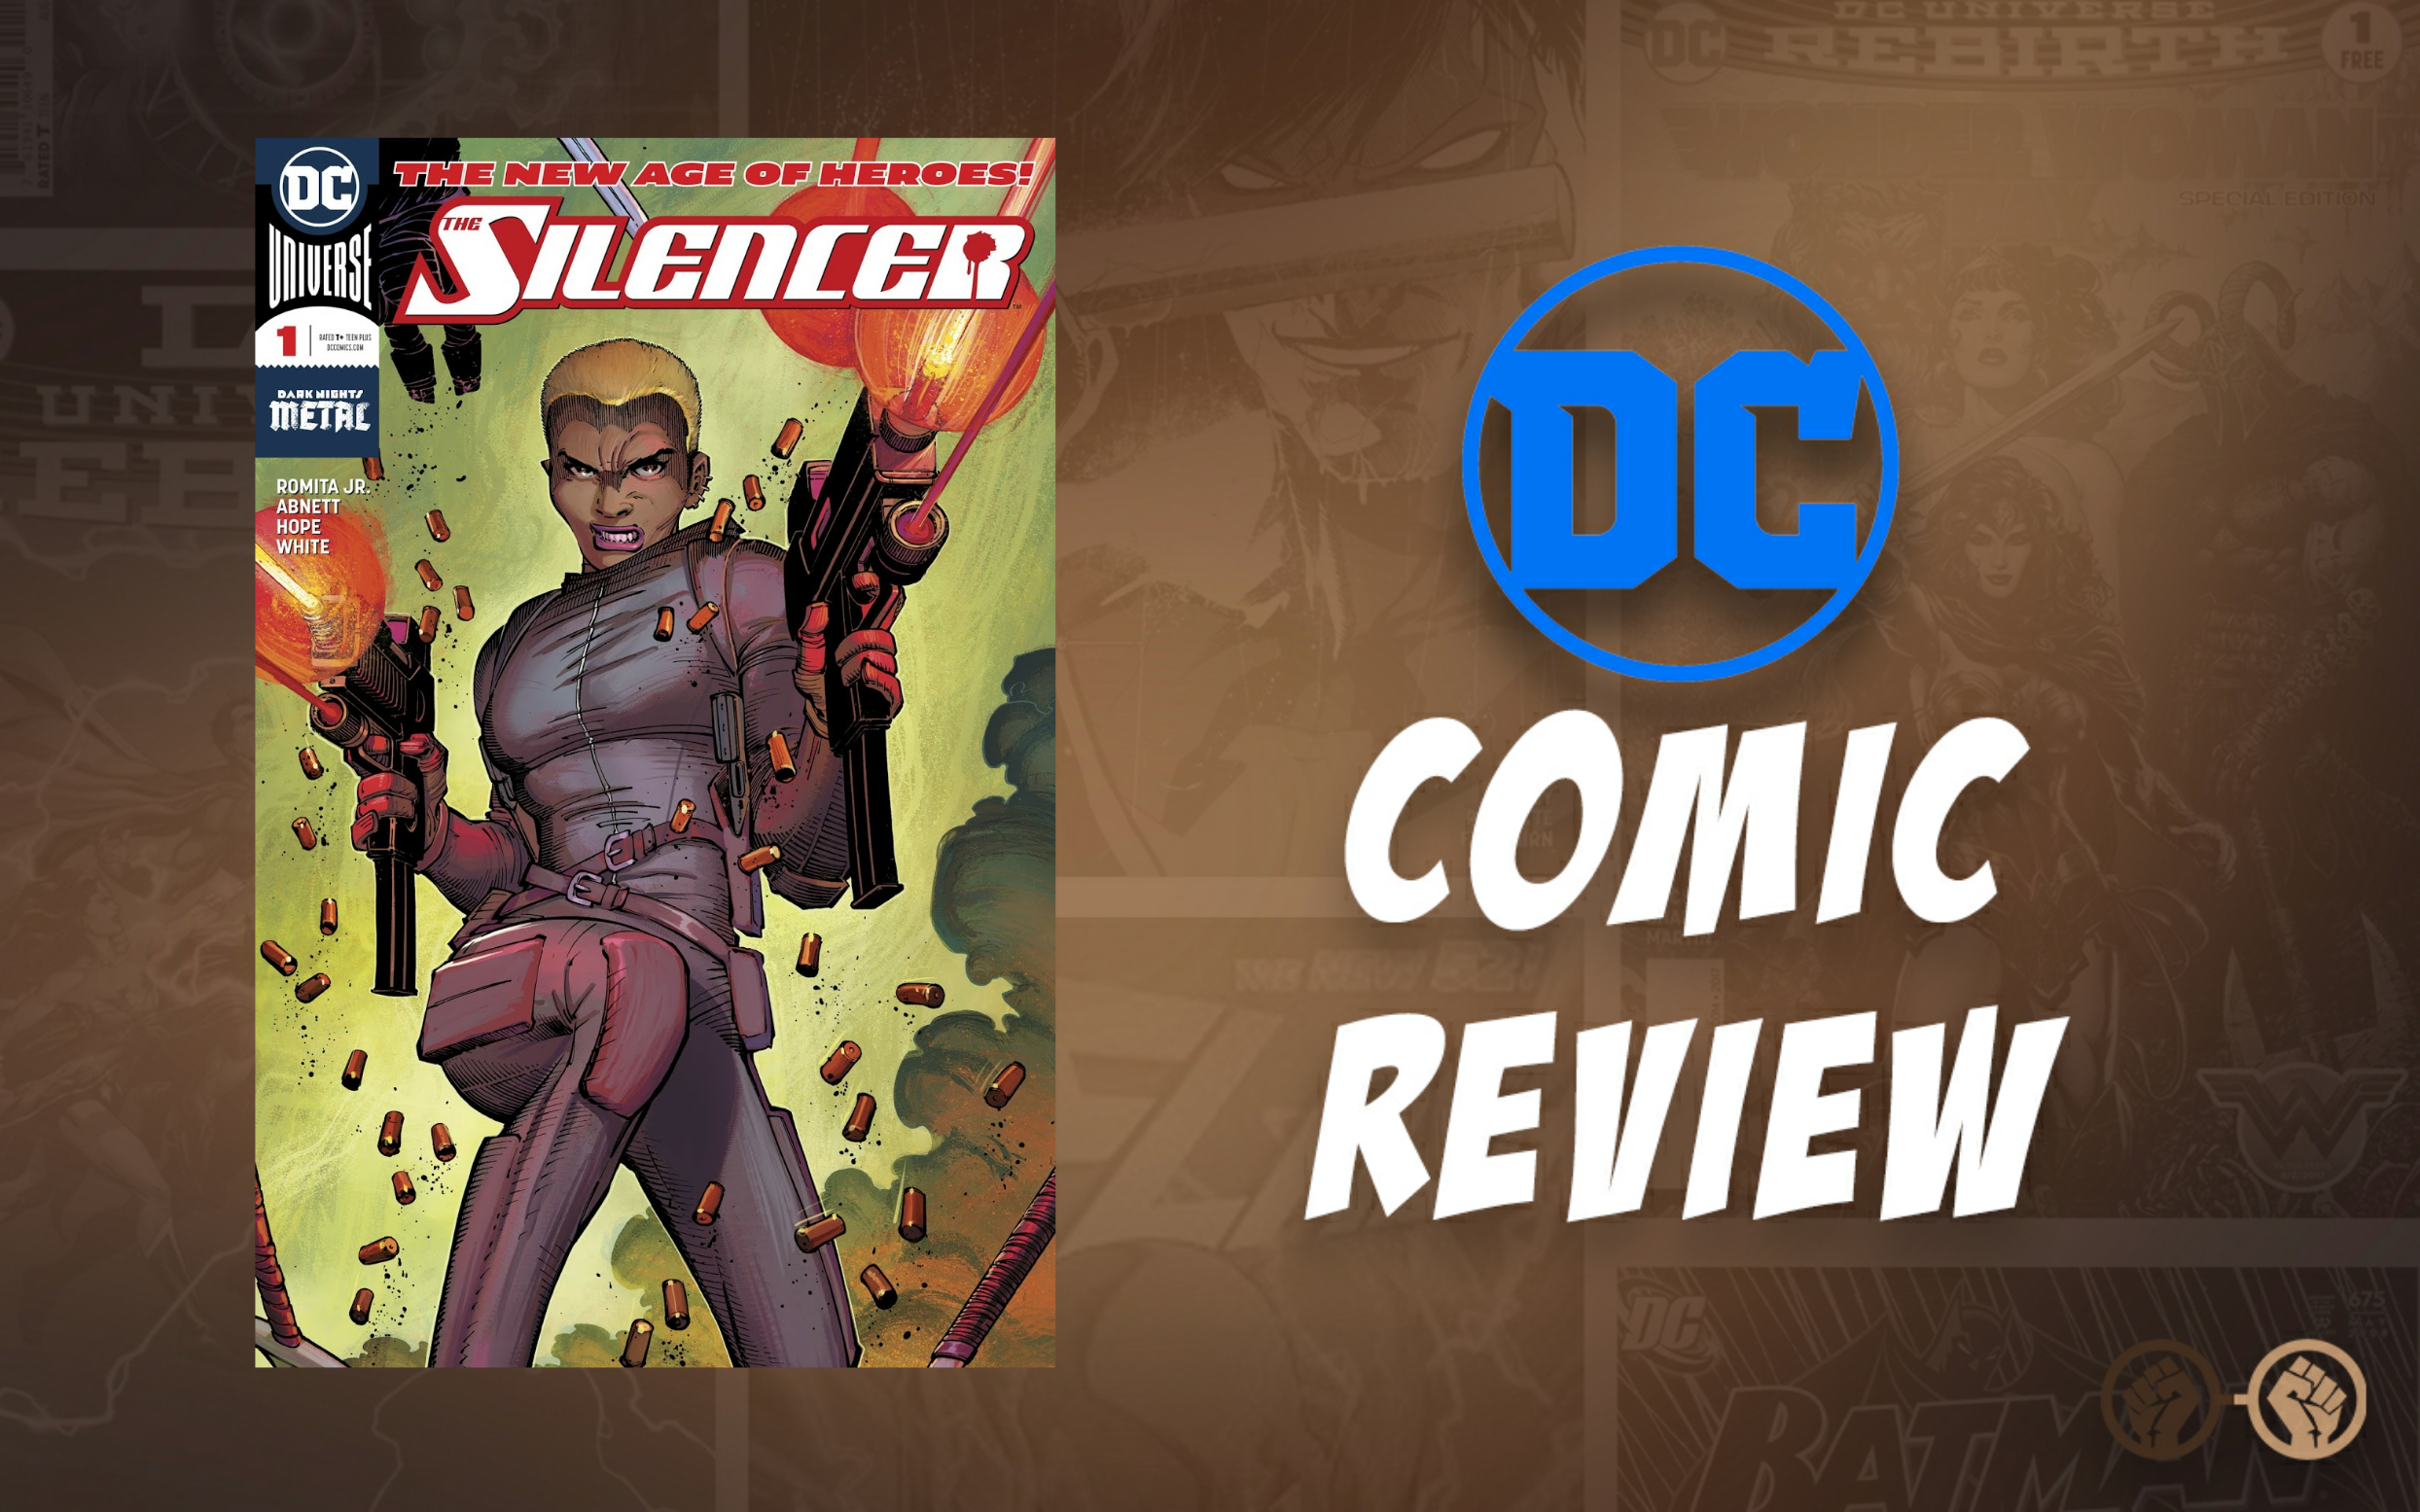 GOC Comics Review: New Age of DC Heroes Gets It Right with The Silencer #1